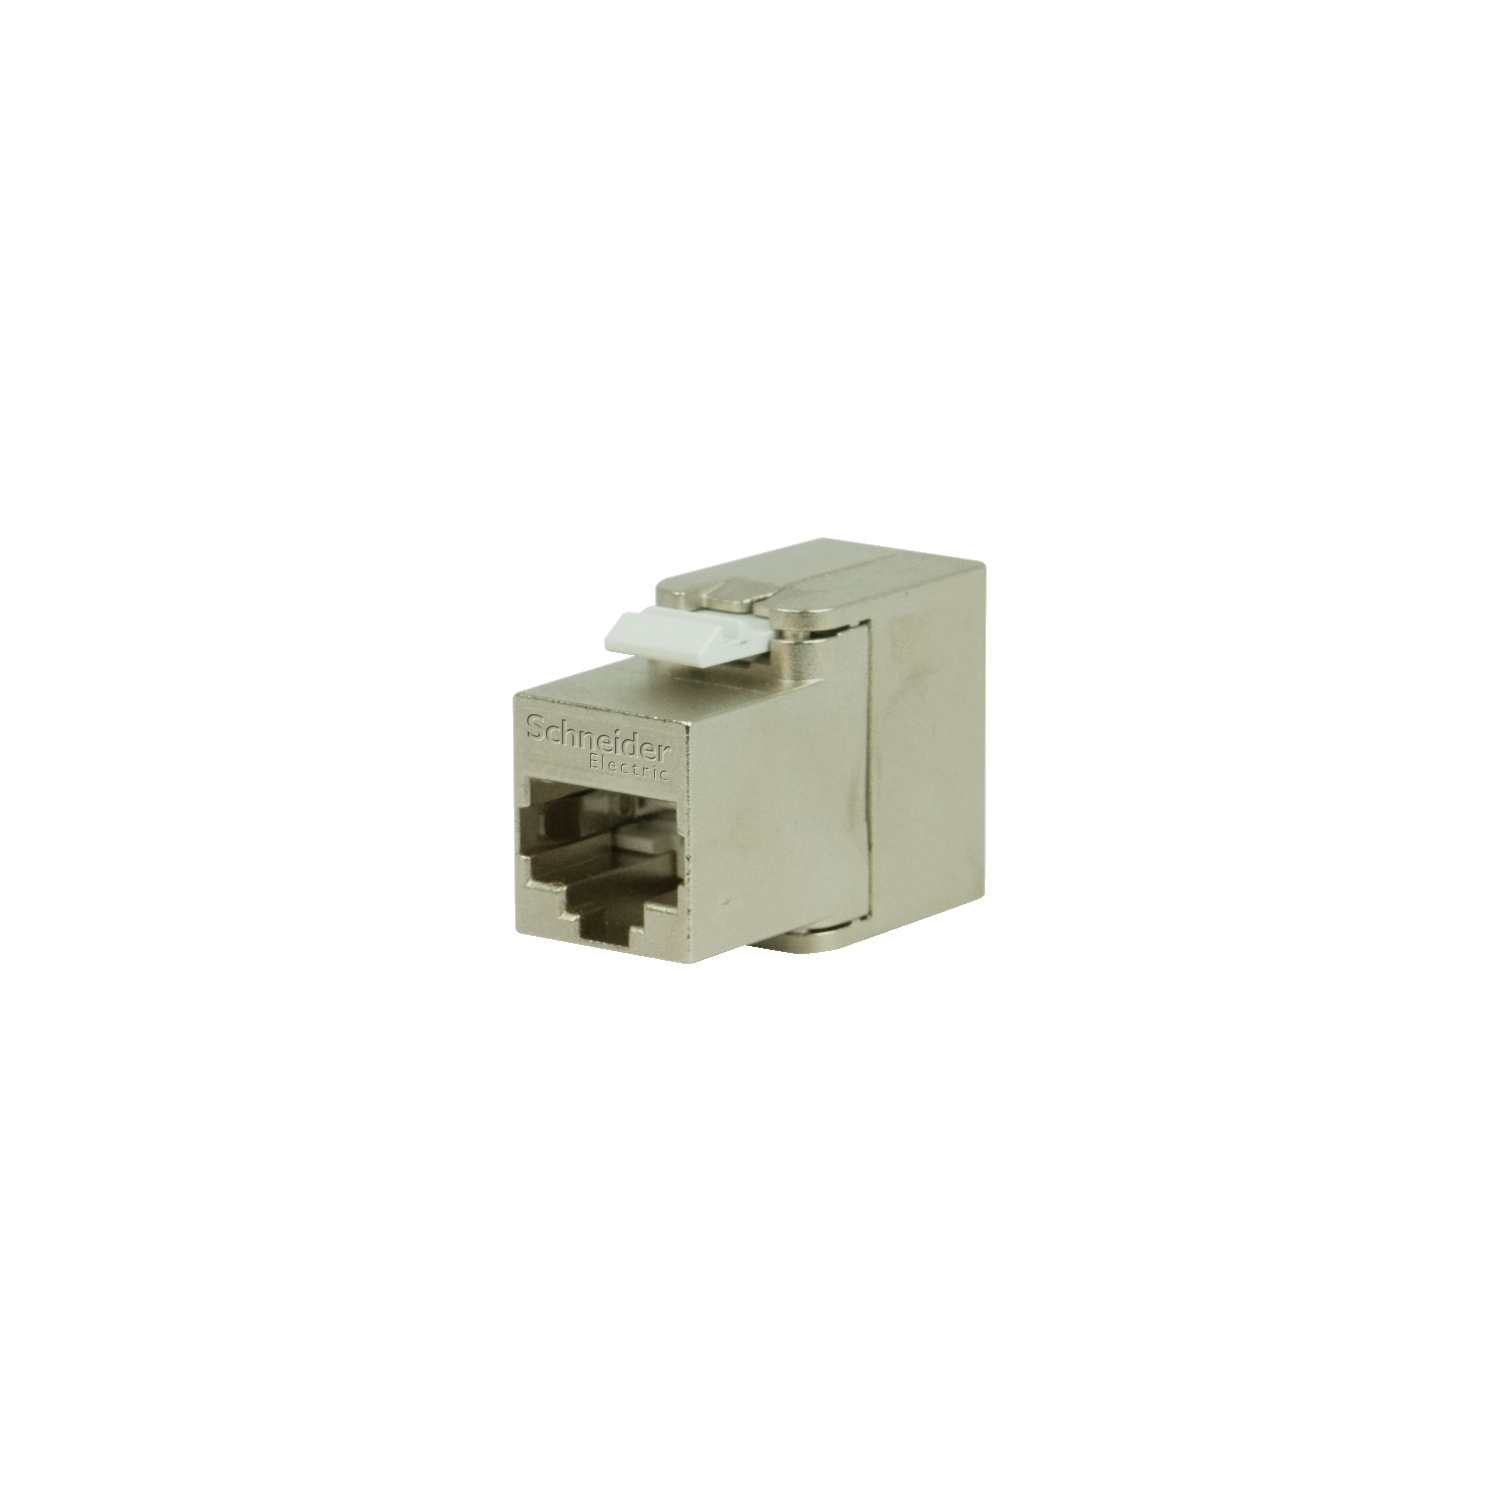 Actassi - modular jack - category 6A - 10G - FTP - non shuttered - panel version